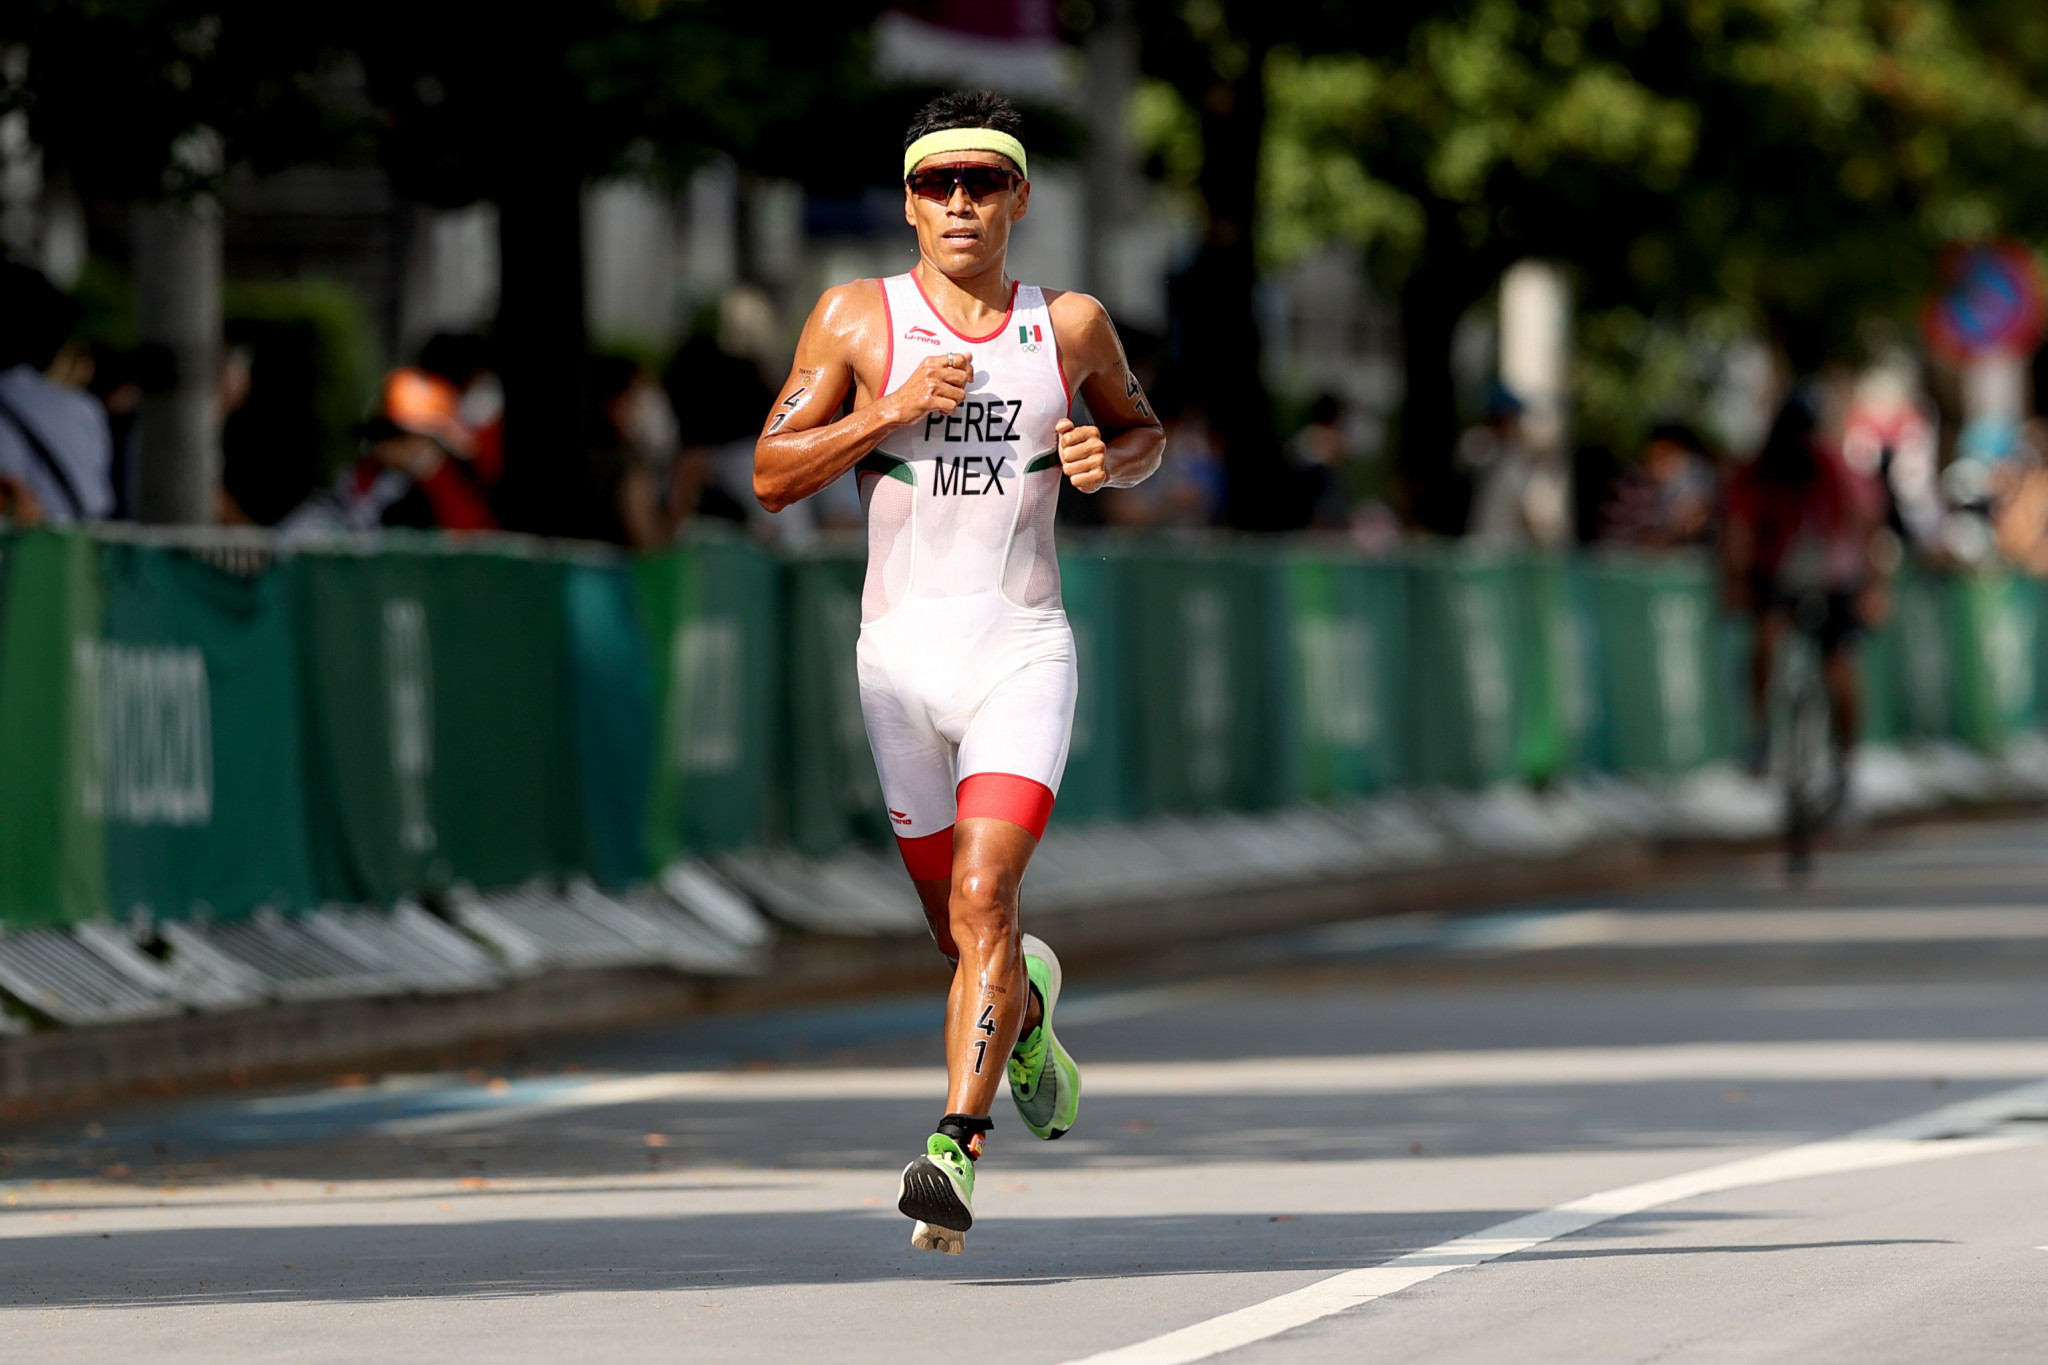 Irving Perez won the men's elite race at the Americas Triathlon Championships ©Getty Images